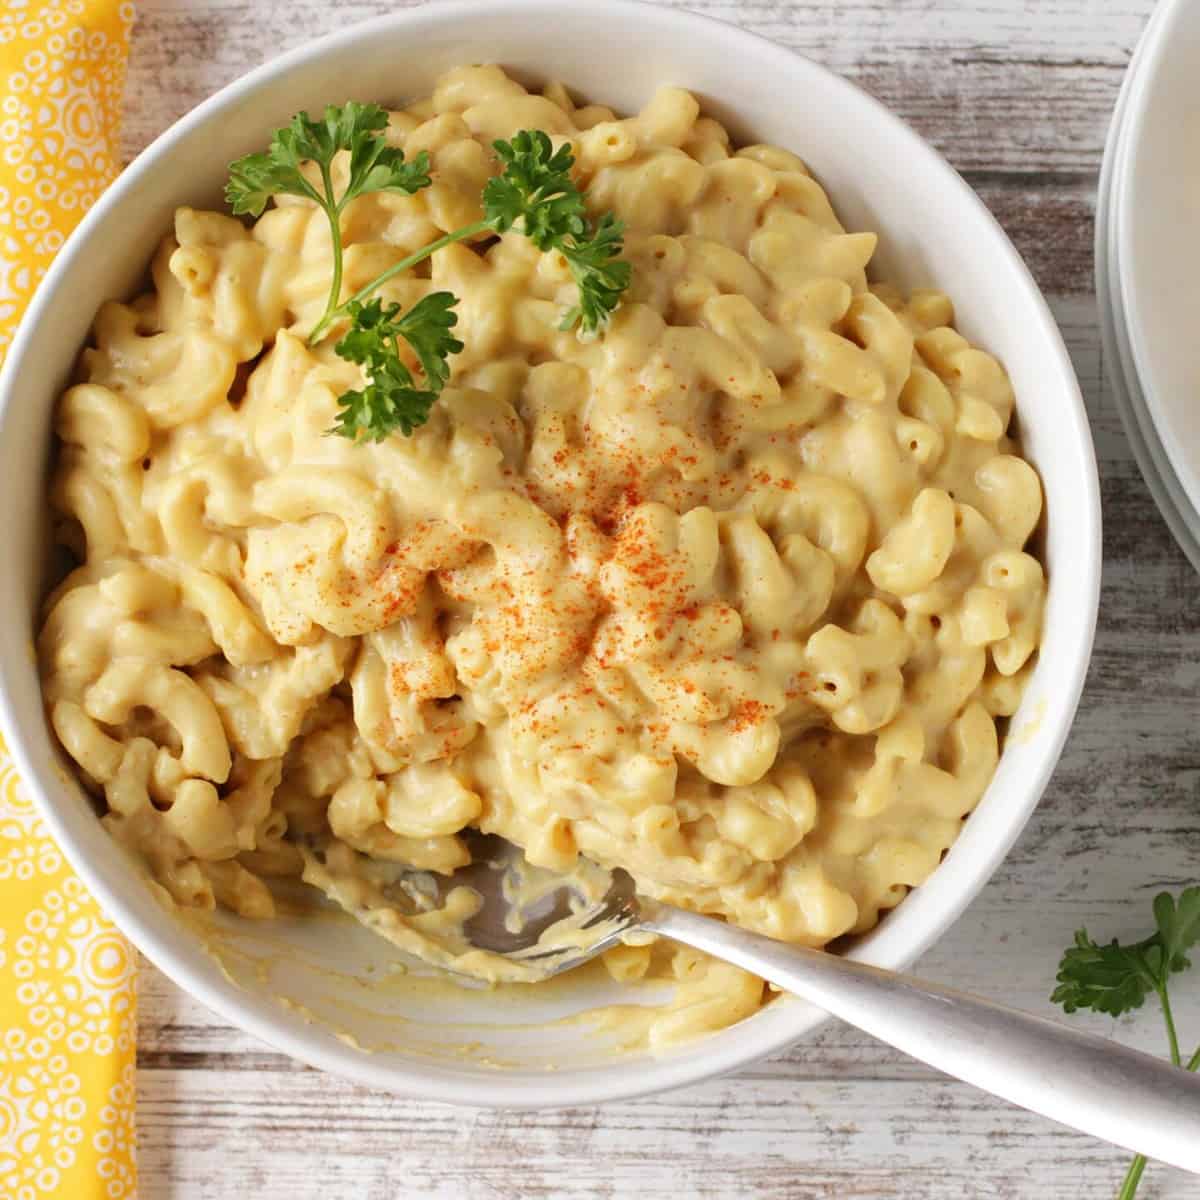  Creamy and comforting, this vegan mac and cheese is the ultimate comfort food!